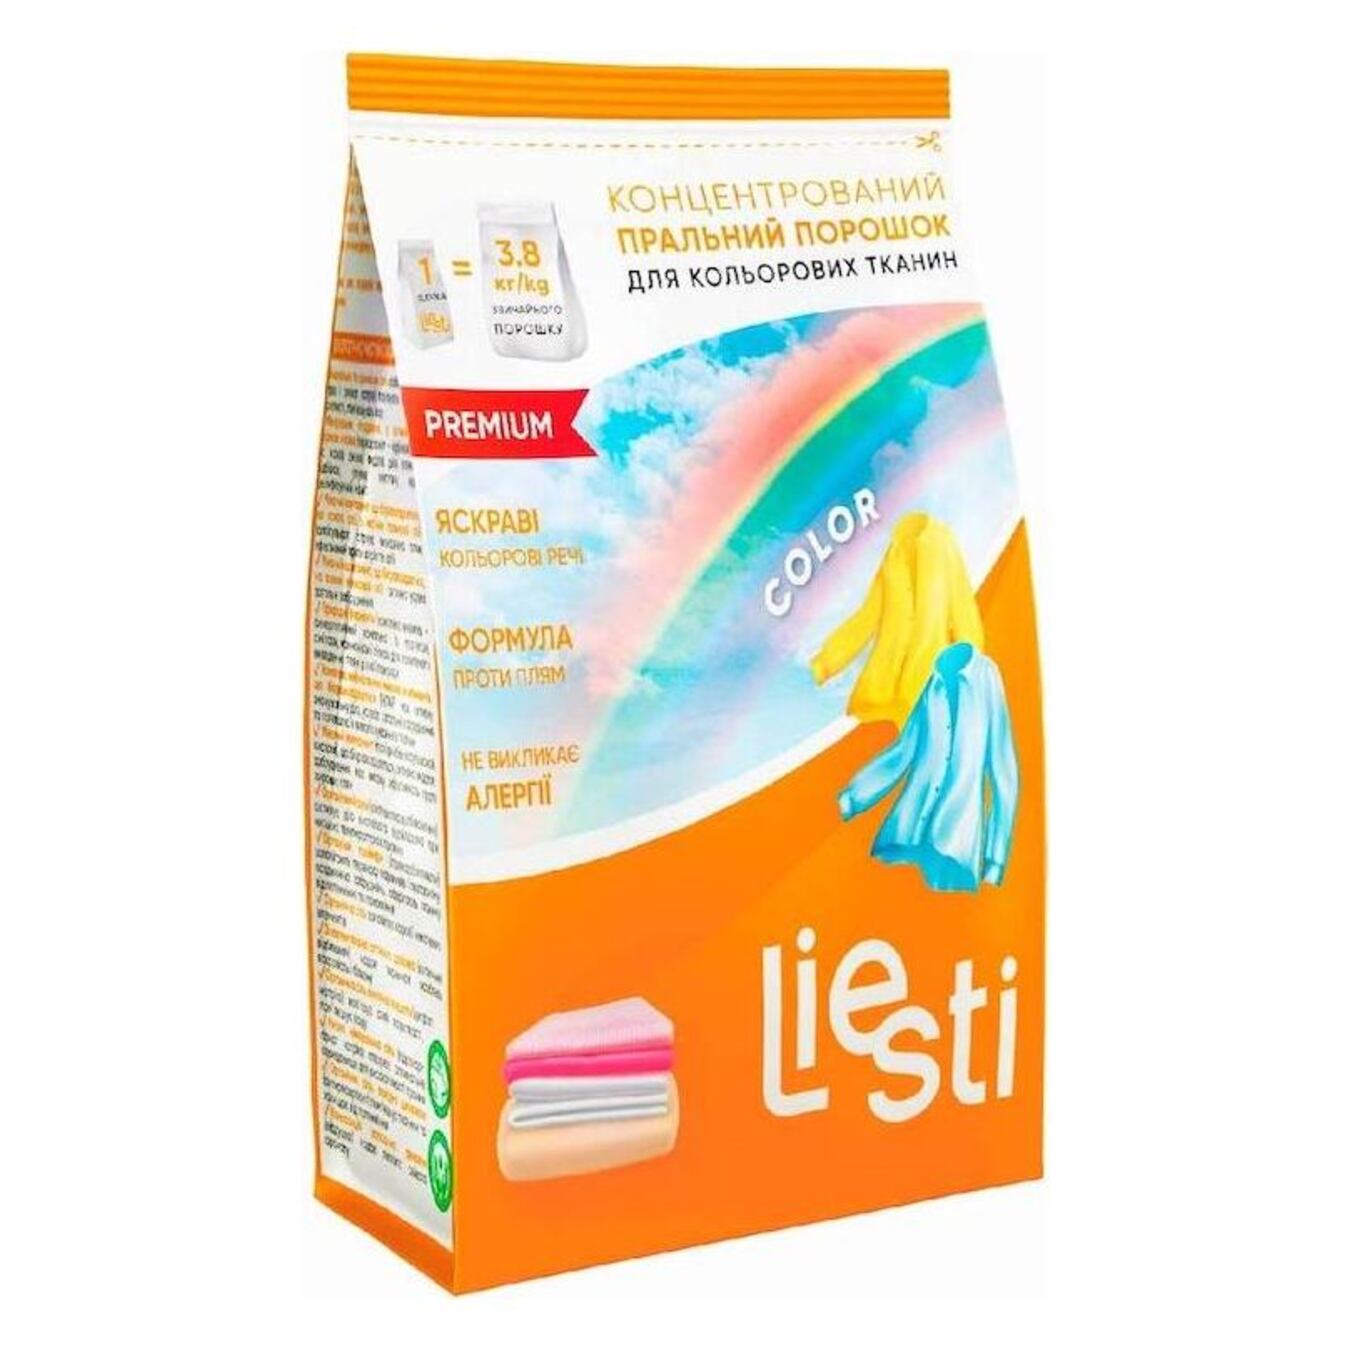 Liesti Color powder for washing colored fabrics is concentrated 1 kg